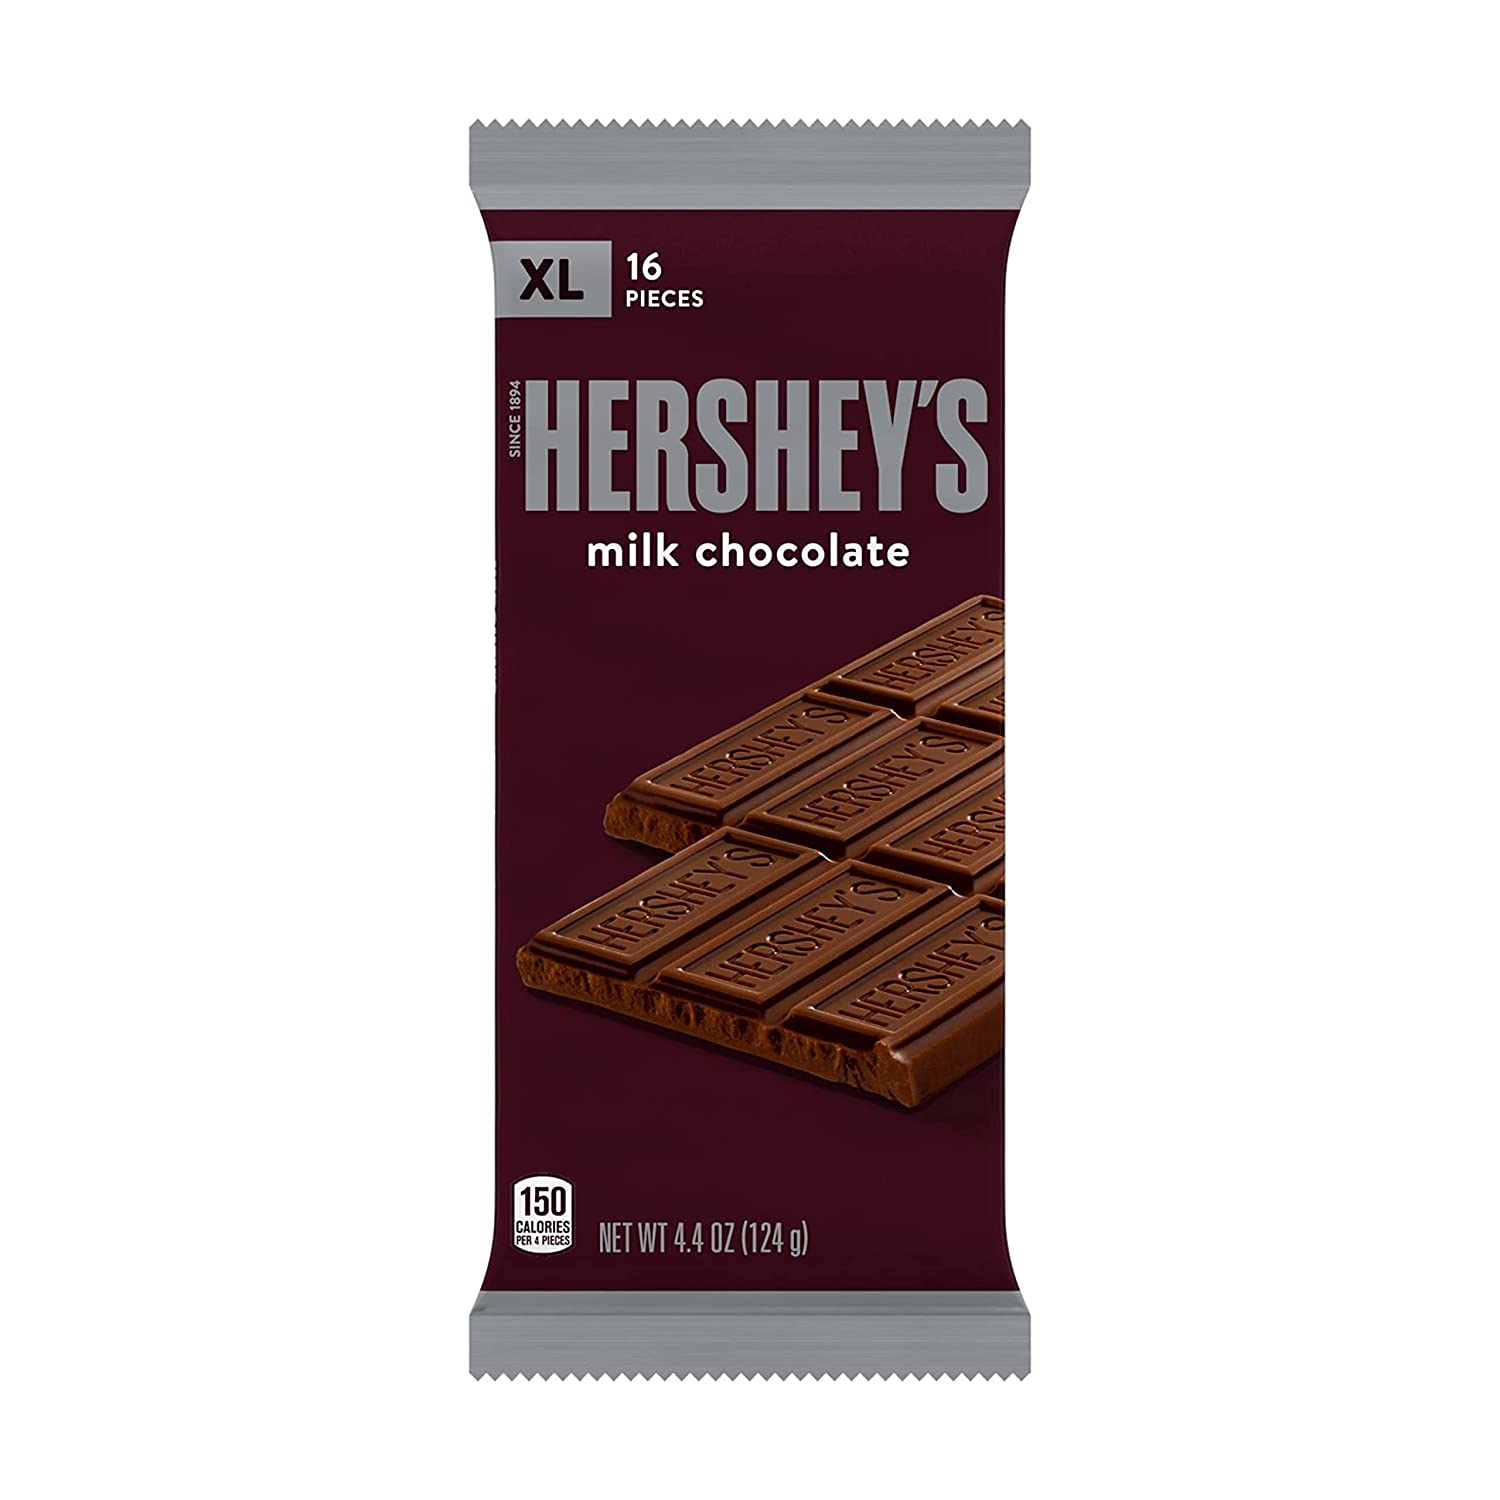 12-Count 4.4-Oz Hershey's Milk Chocolate XL Bars $17.28 ($1.44 each) + Free Shipping w/ Prime or on orders over $35